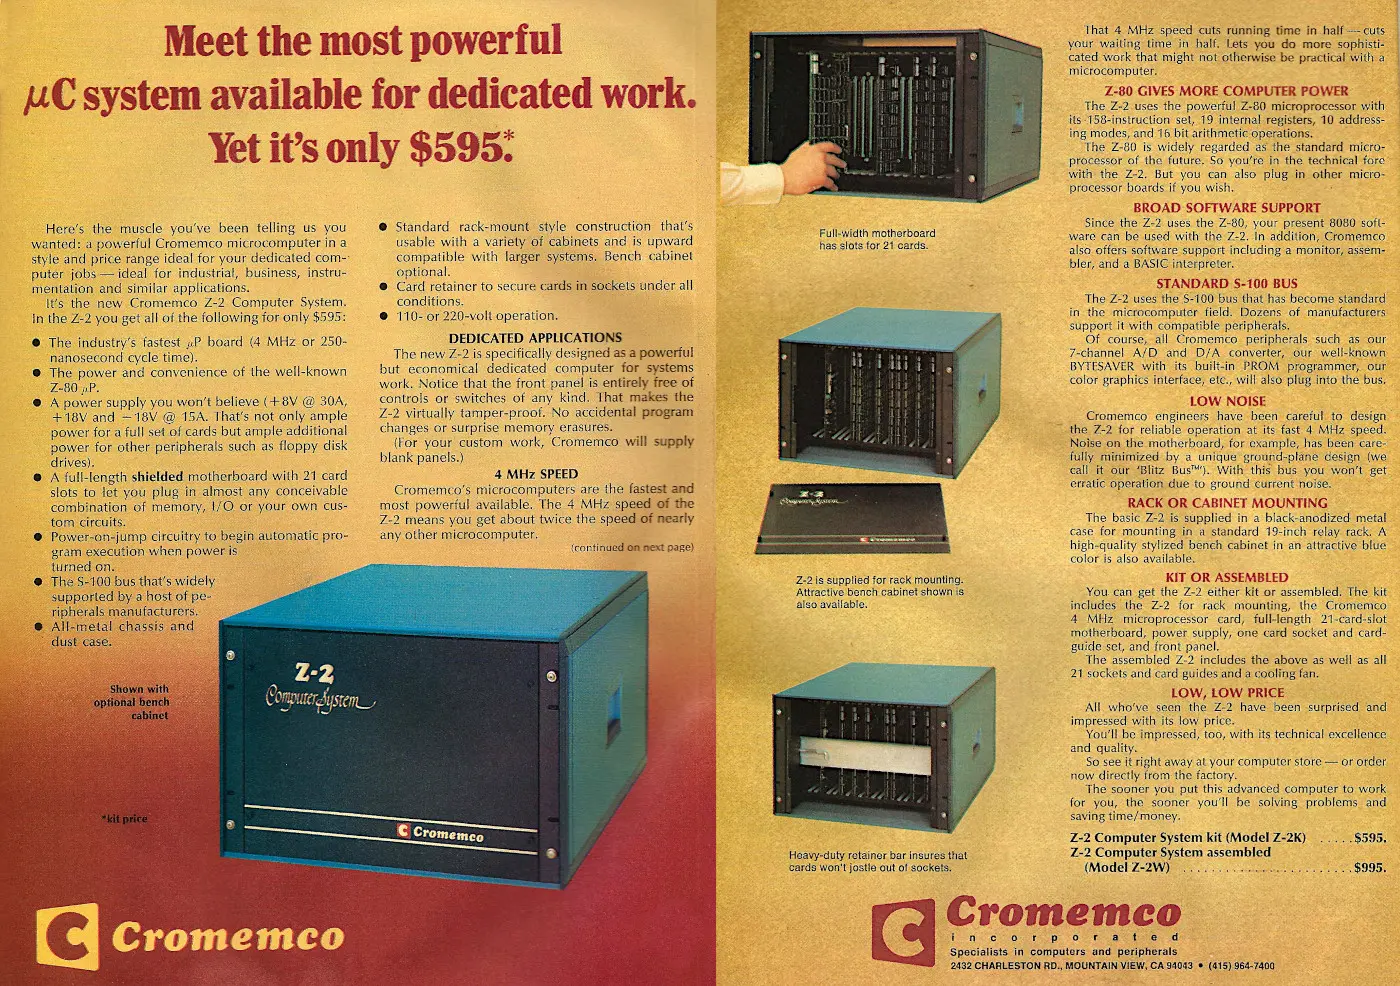 Cromemco Advert: <b>Cromemco Z-2: Meet the most powerful μC system available for dedicated work</b>, from Byte - The Small Systems Journal, April 1977